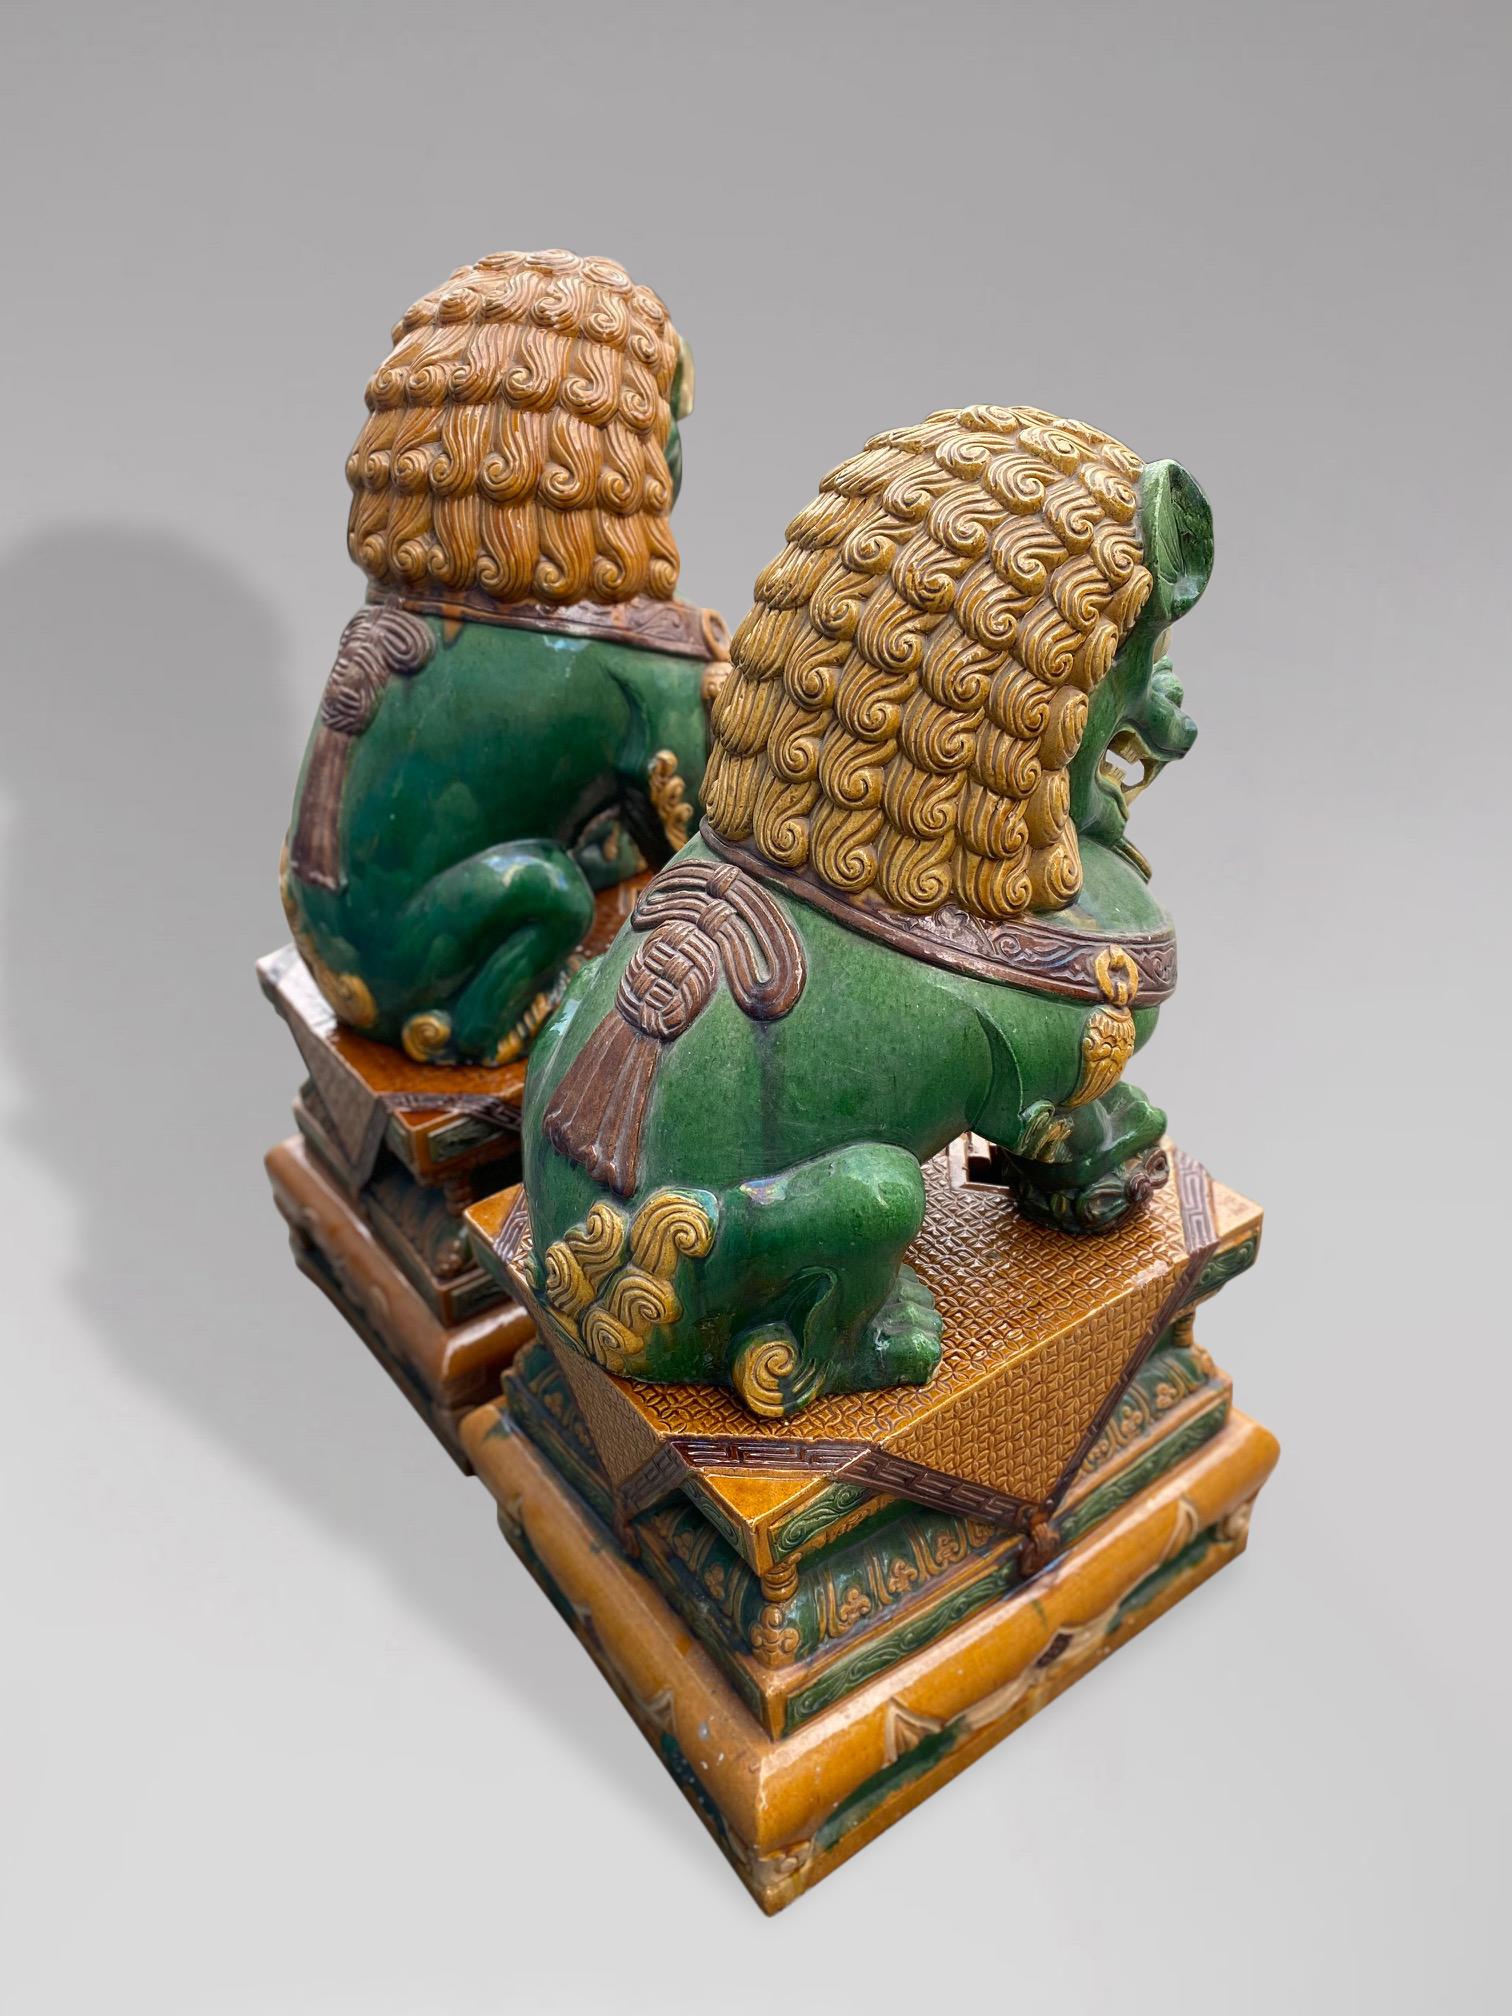 A large pair of unique and very decorative 20th century ceramic Imperial Guardian Lions, commonly known as Foo Dogs. Decorated in the Majolica style bright green and yellow toned overglaze polychrome ceramic. Both items in traditional dress and